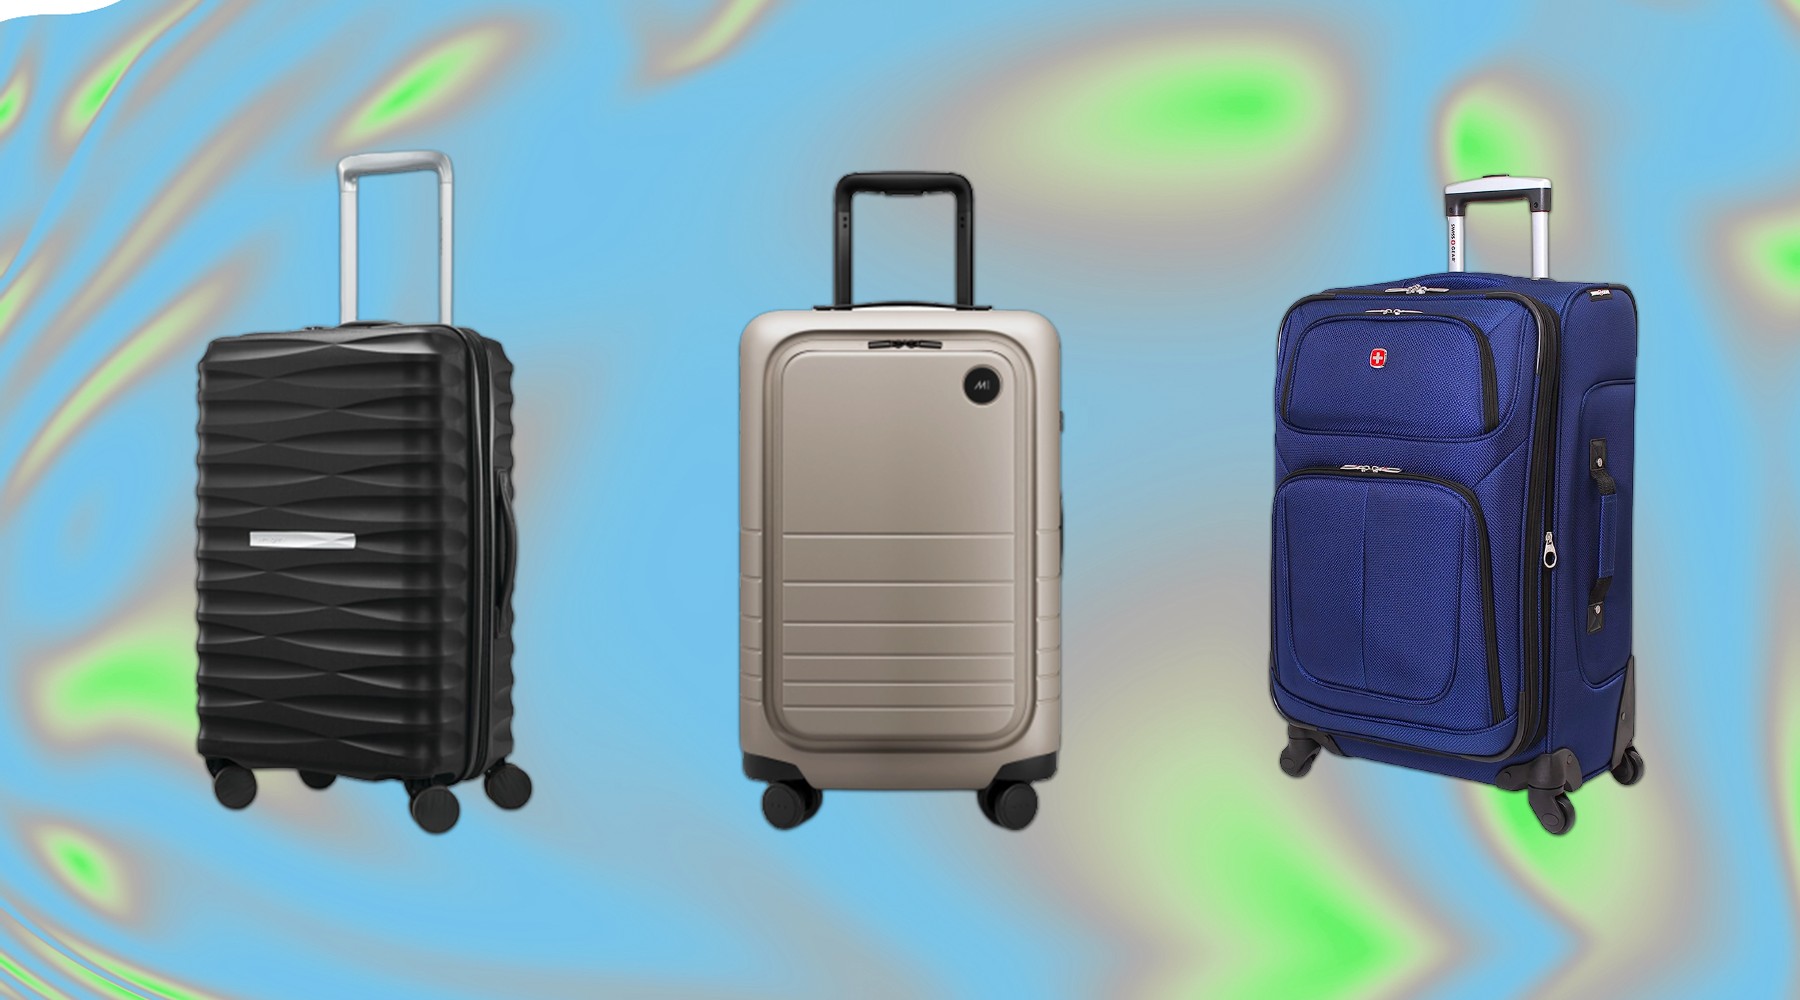 The Best Luggage For International Travel 2023 - Forbes Vetted